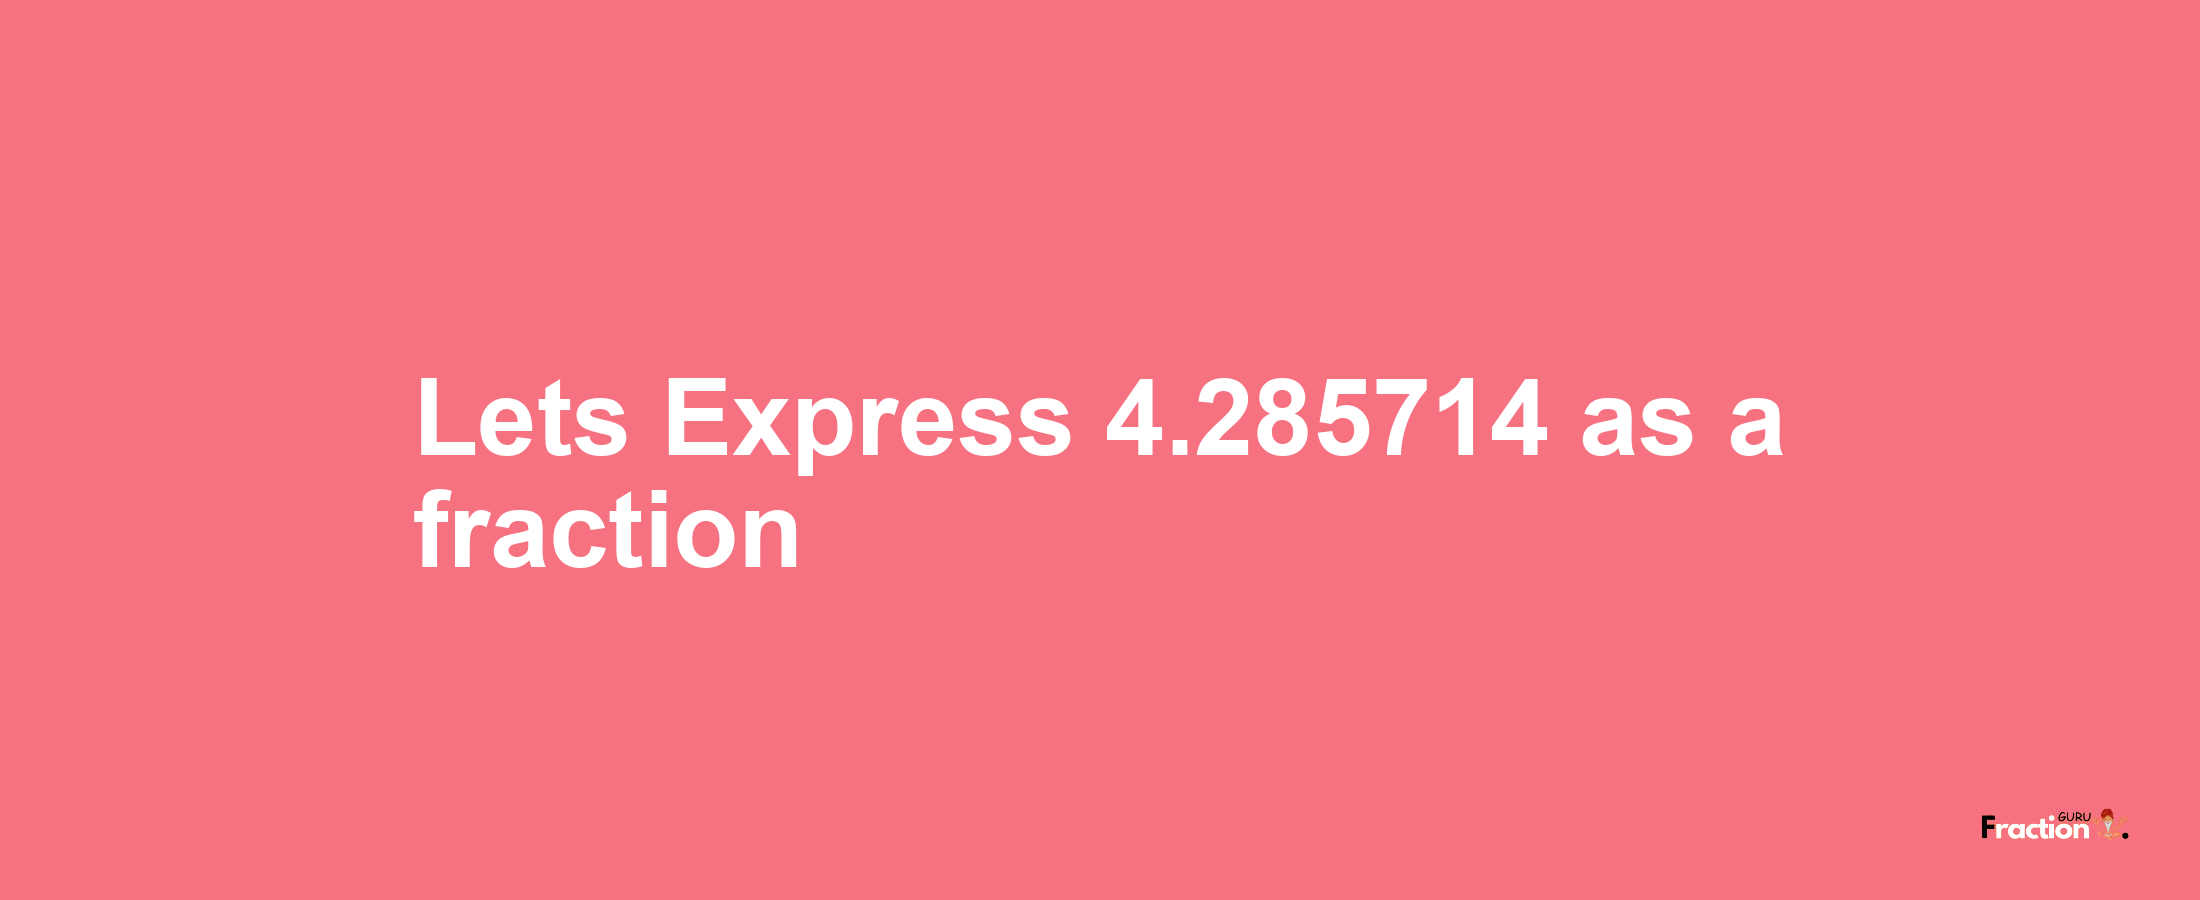 Lets Express 4.285714 as afraction